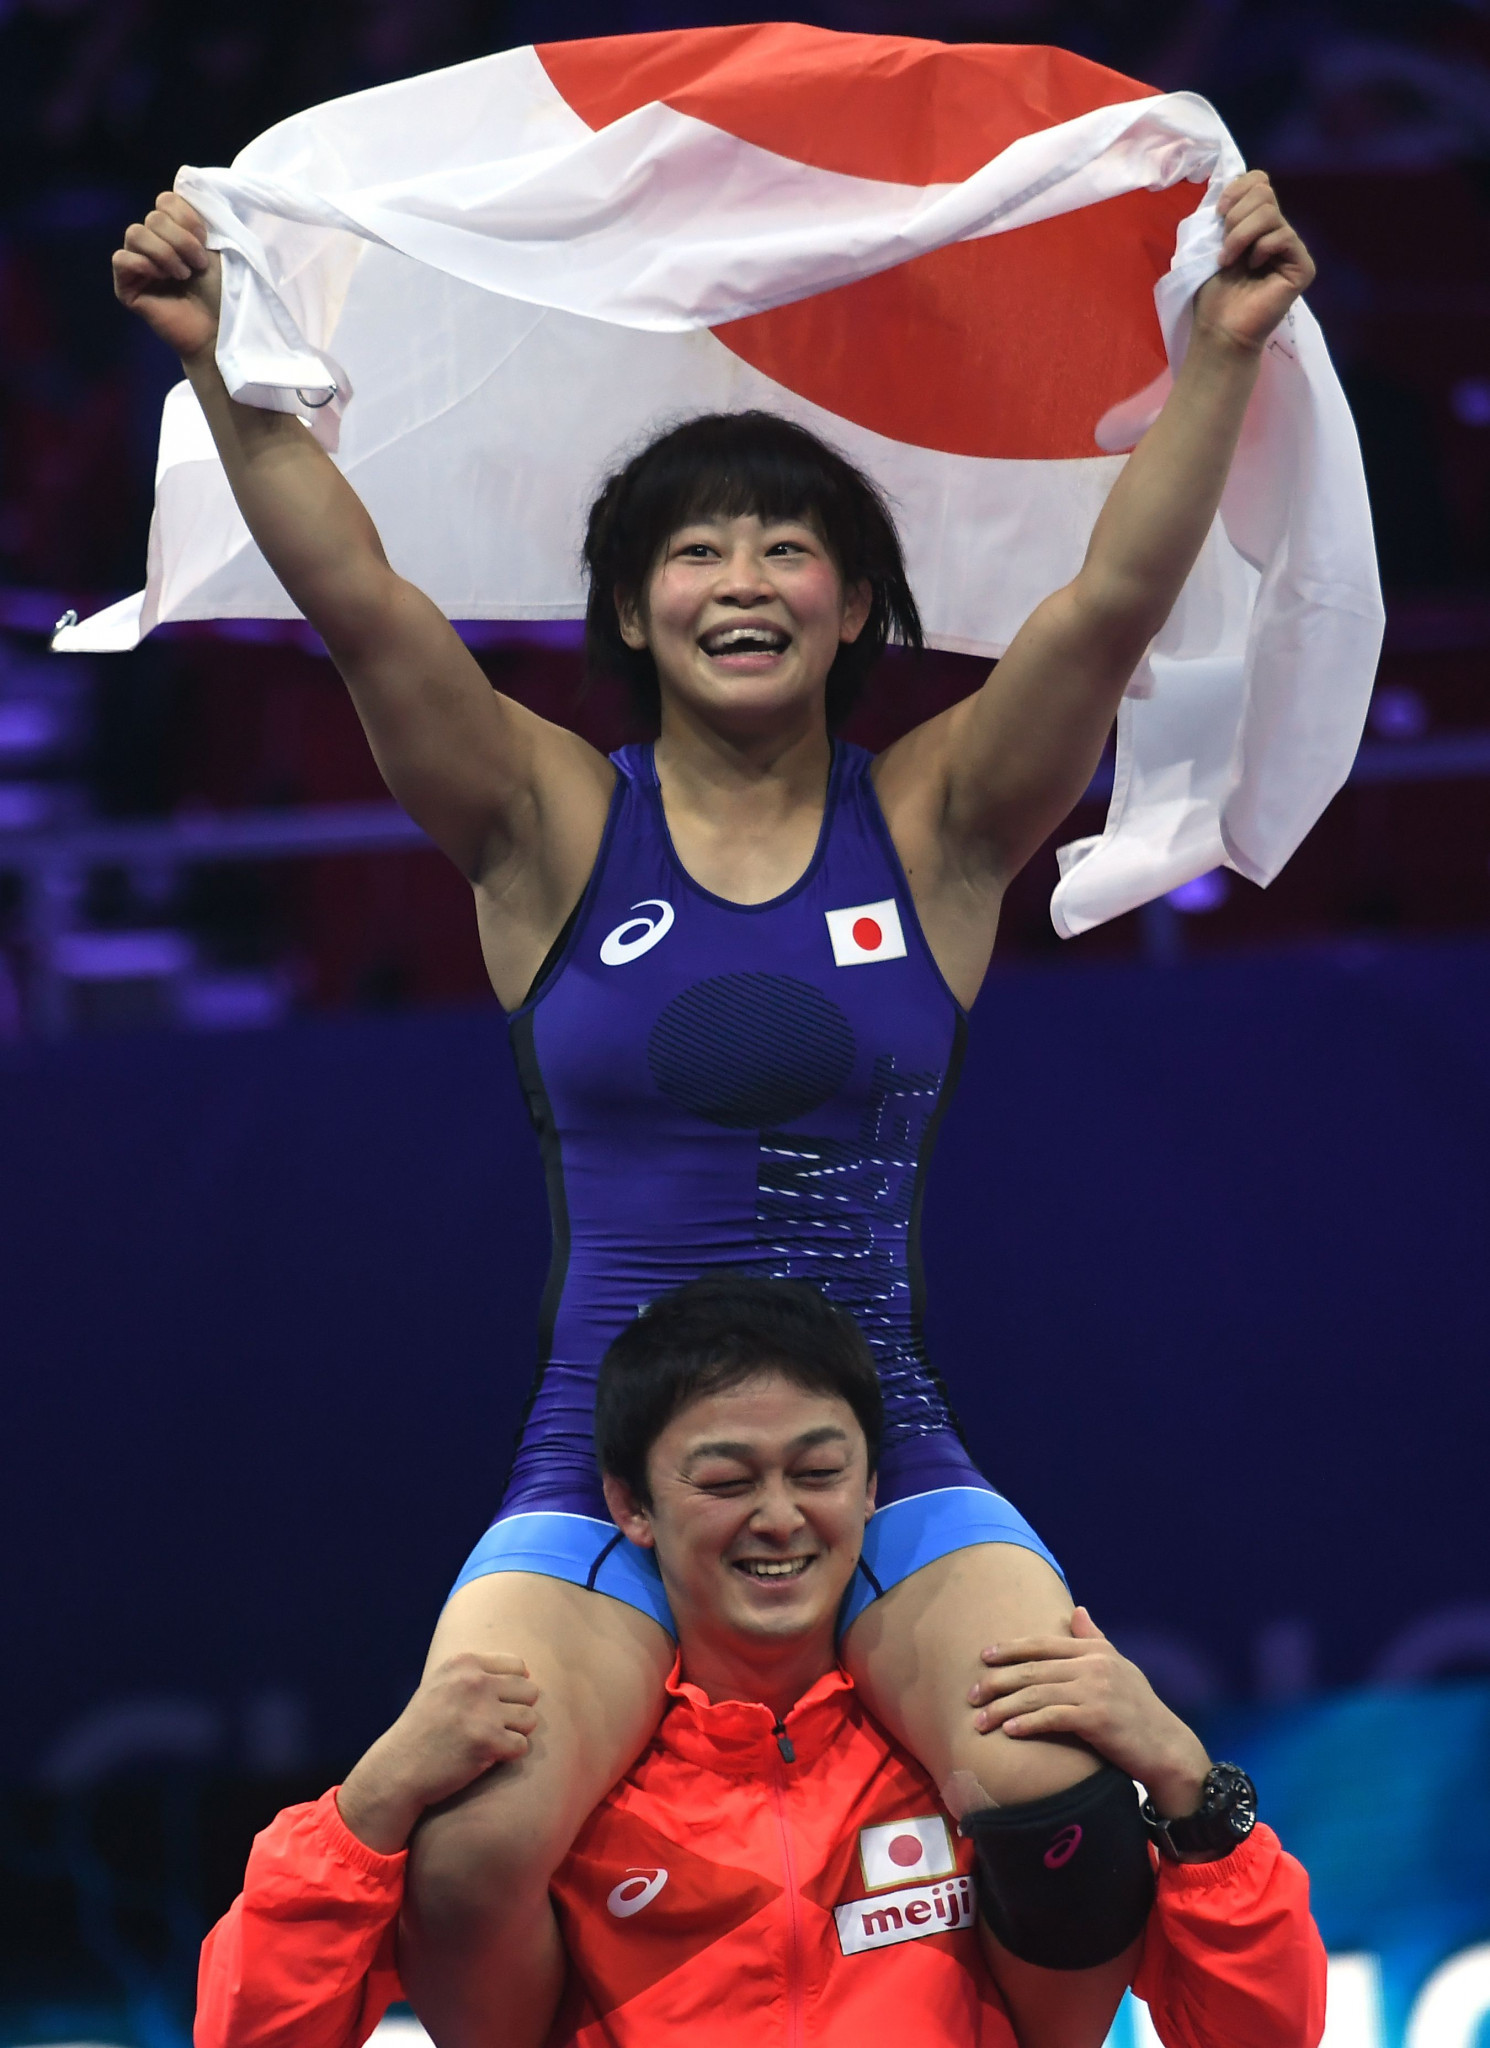 Mayu Mukaida won the first of two golds for Japan tonight when she triumphed in the 55kg division ©Getty Images